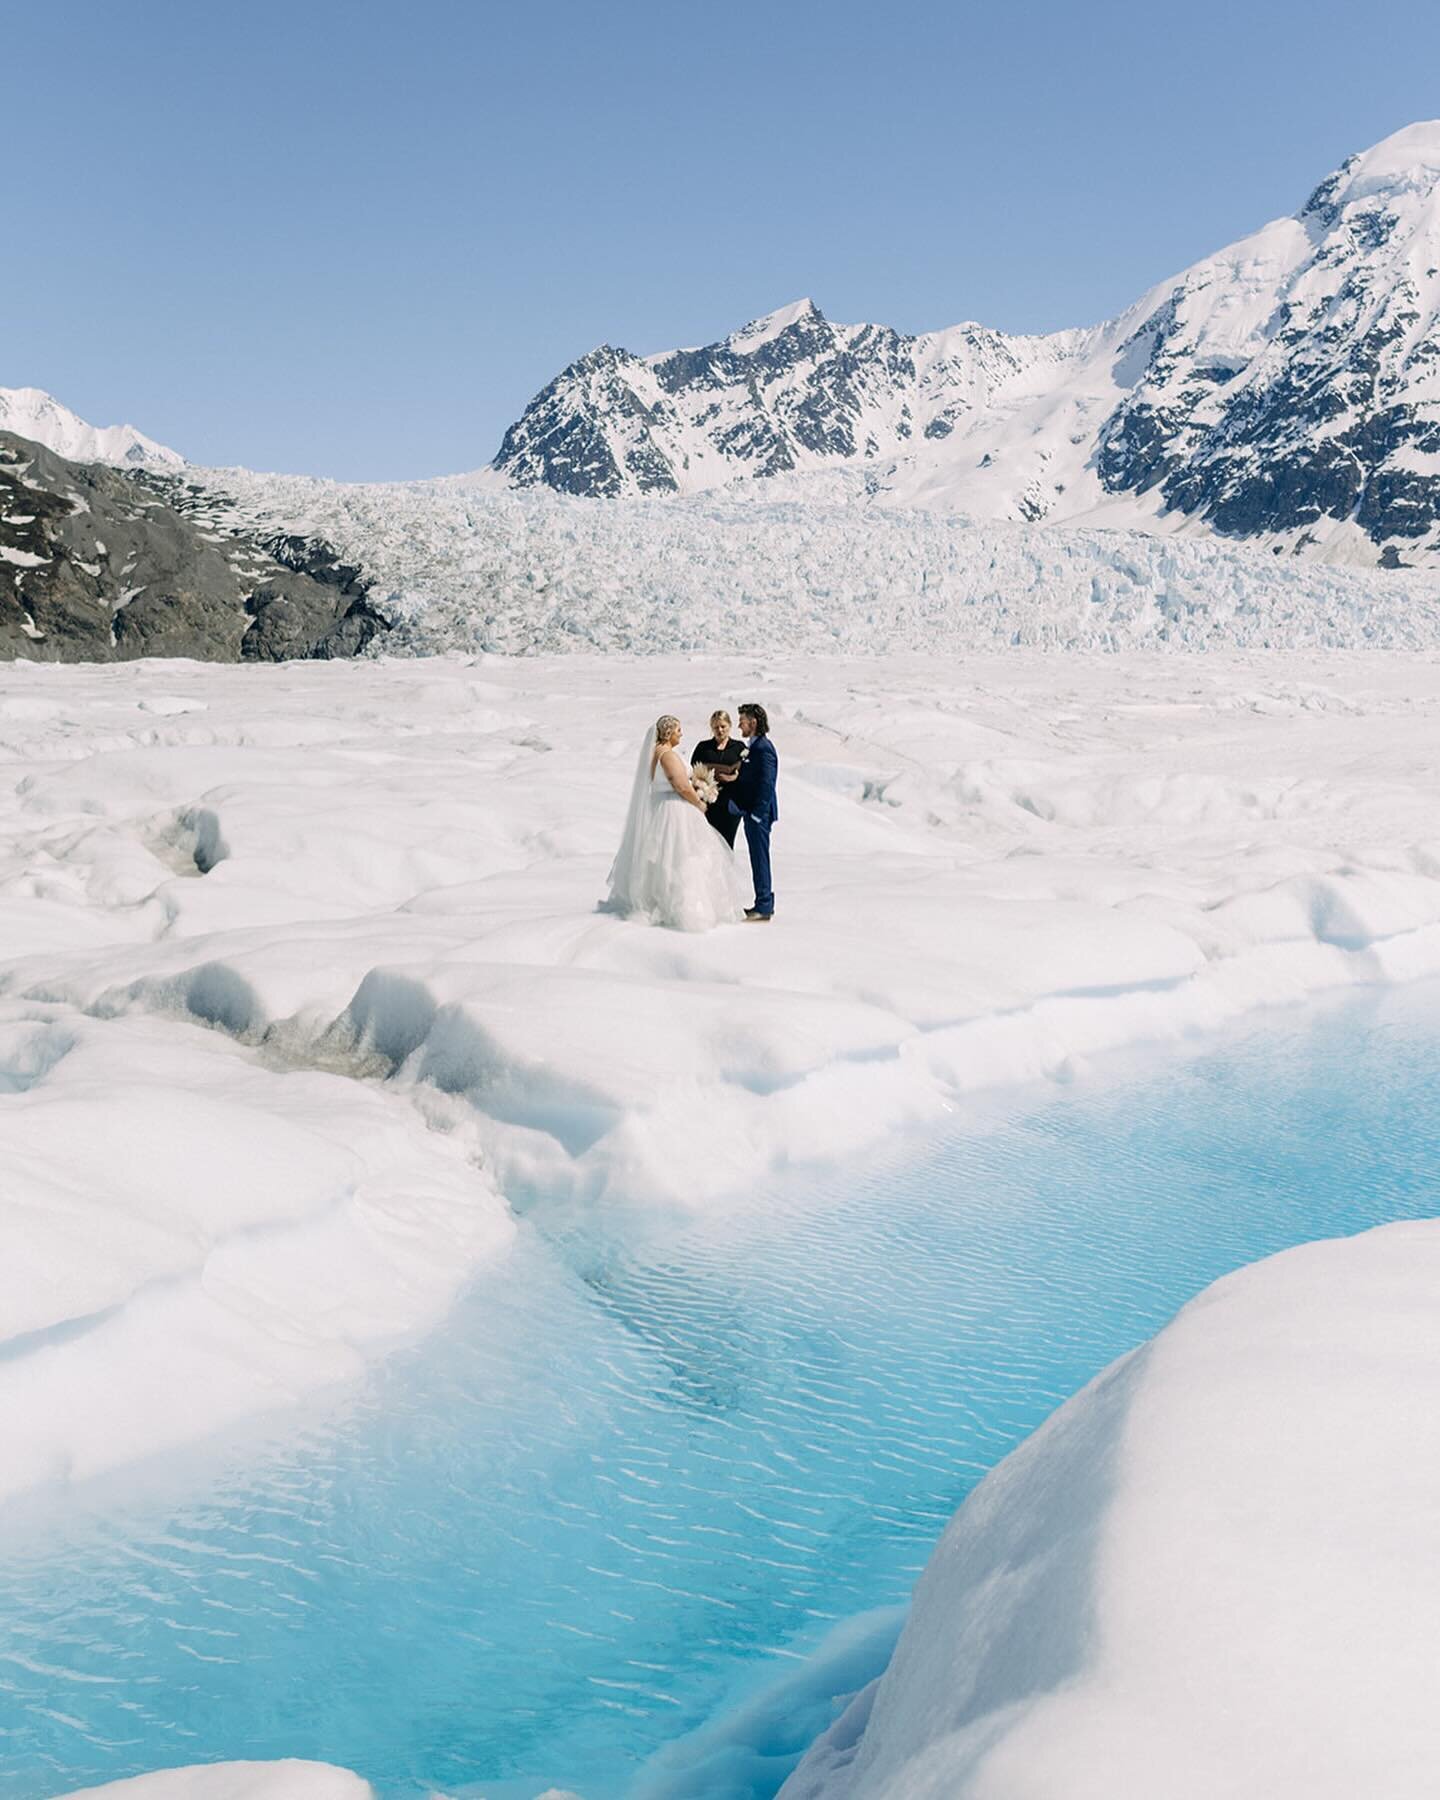 Your elopement is all about adventure - and tying the knot in Alaska means there are plenty of incredible, unique adventures that can make the day you get married truly special. Imagine tying the knot standing on top of one of Alaska&rsquo;s majestic